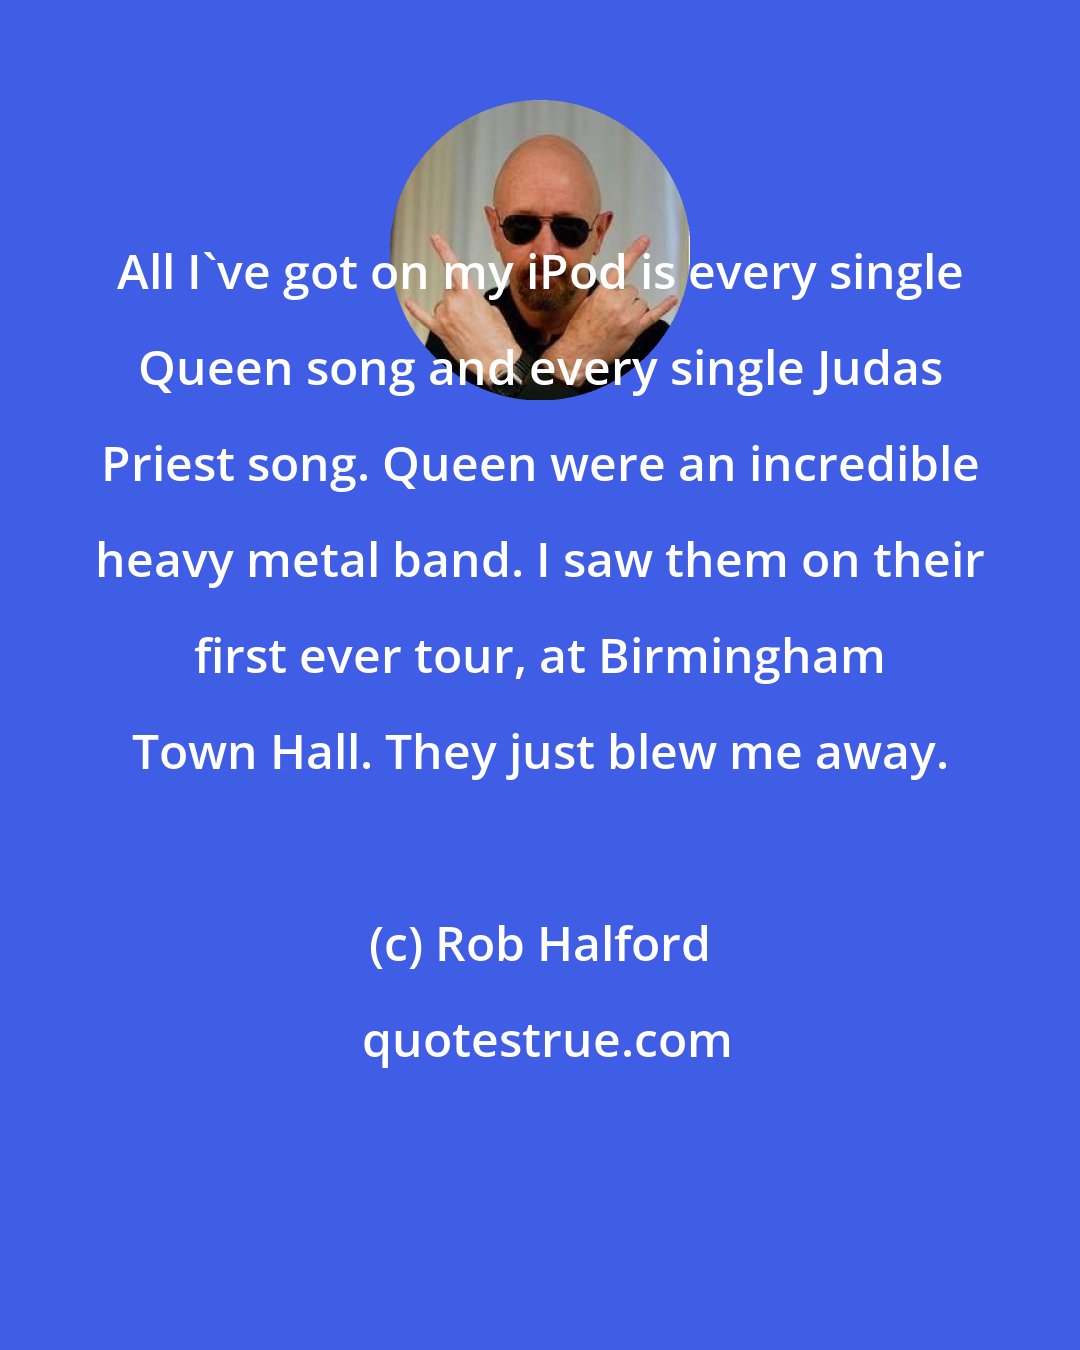 Rob Halford: All I've got on my iPod is every single Queen song and every single Judas Priest song. Queen were an incredible heavy metal band. I saw them on their first ever tour, at Birmingham Town Hall. They just blew me away.